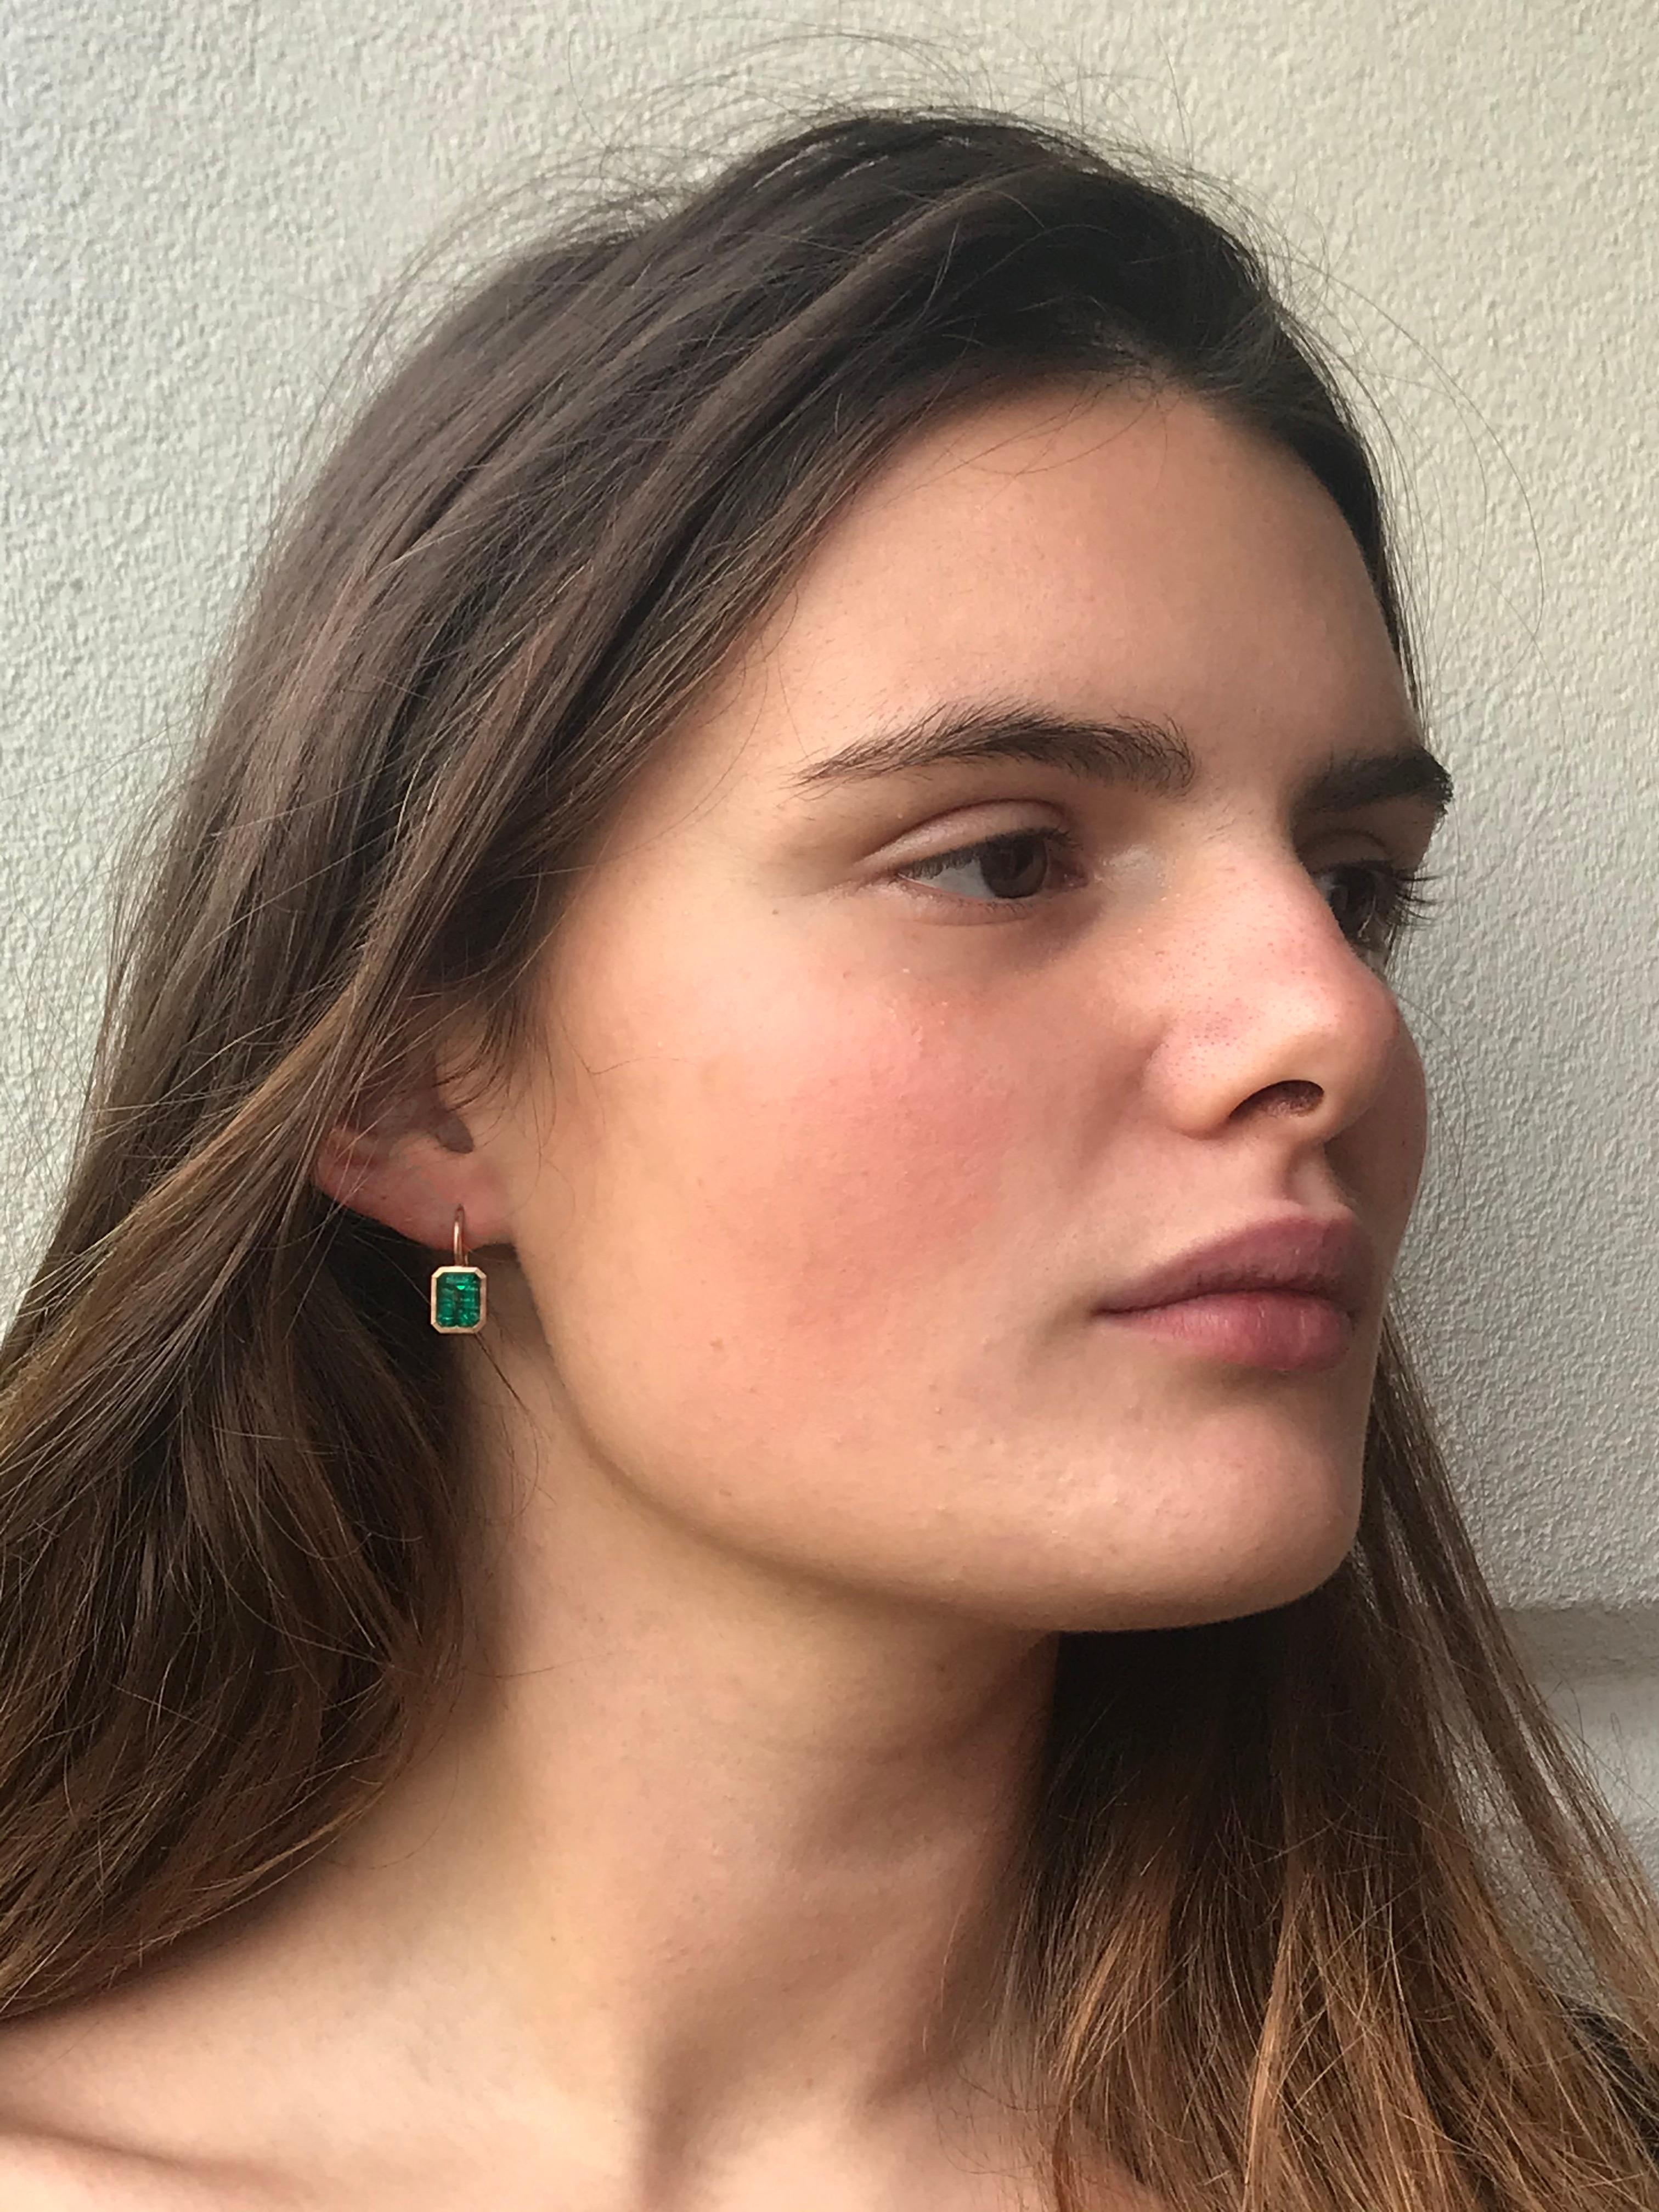 Dalben design  18k rose gold matte finishing earrings with two bezel-set emerald faceted cut  emerald weight 5,4 carats .
The emeralds have a deep green color
They are slightly different in dimension ,  
Bezel stone dimensions :
 9,8 x 7,8 mm   9,3